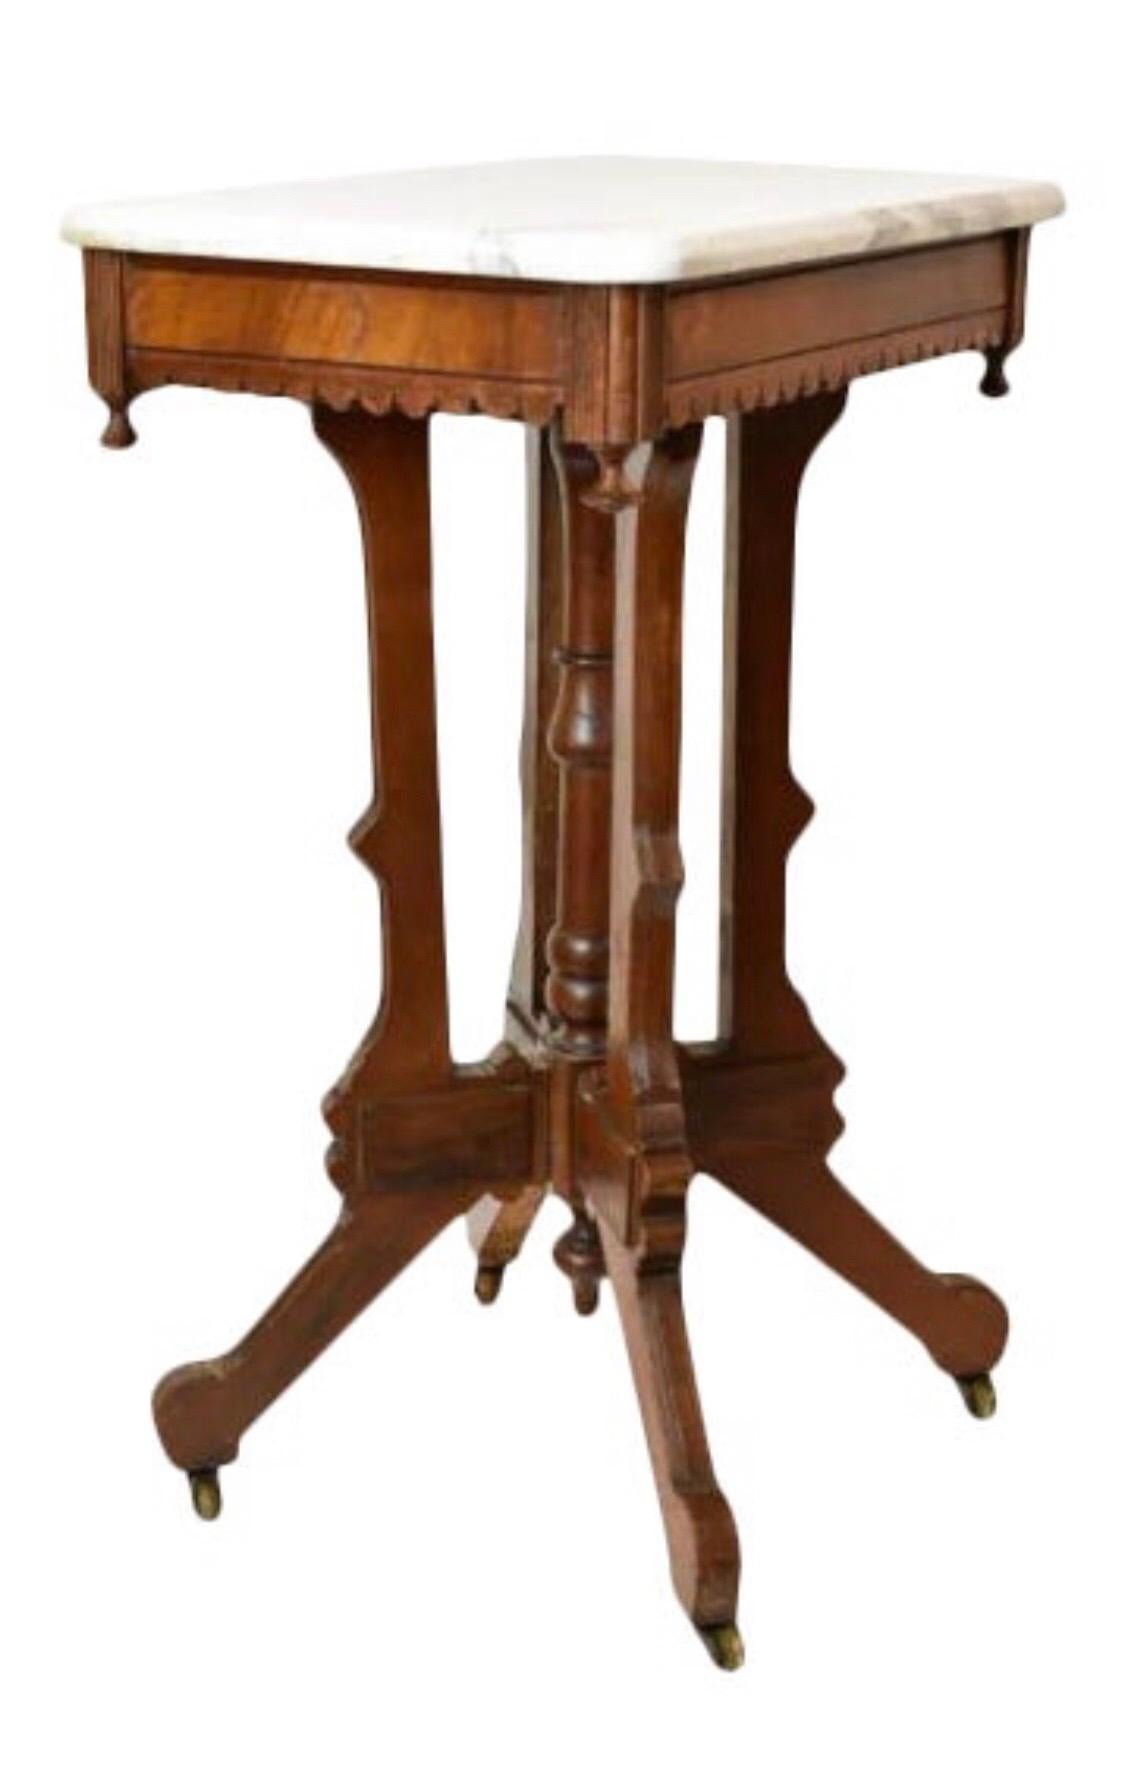 Circa 1890 walnut side table features a carved apron and turned center pedestal. It measures 30-1/2